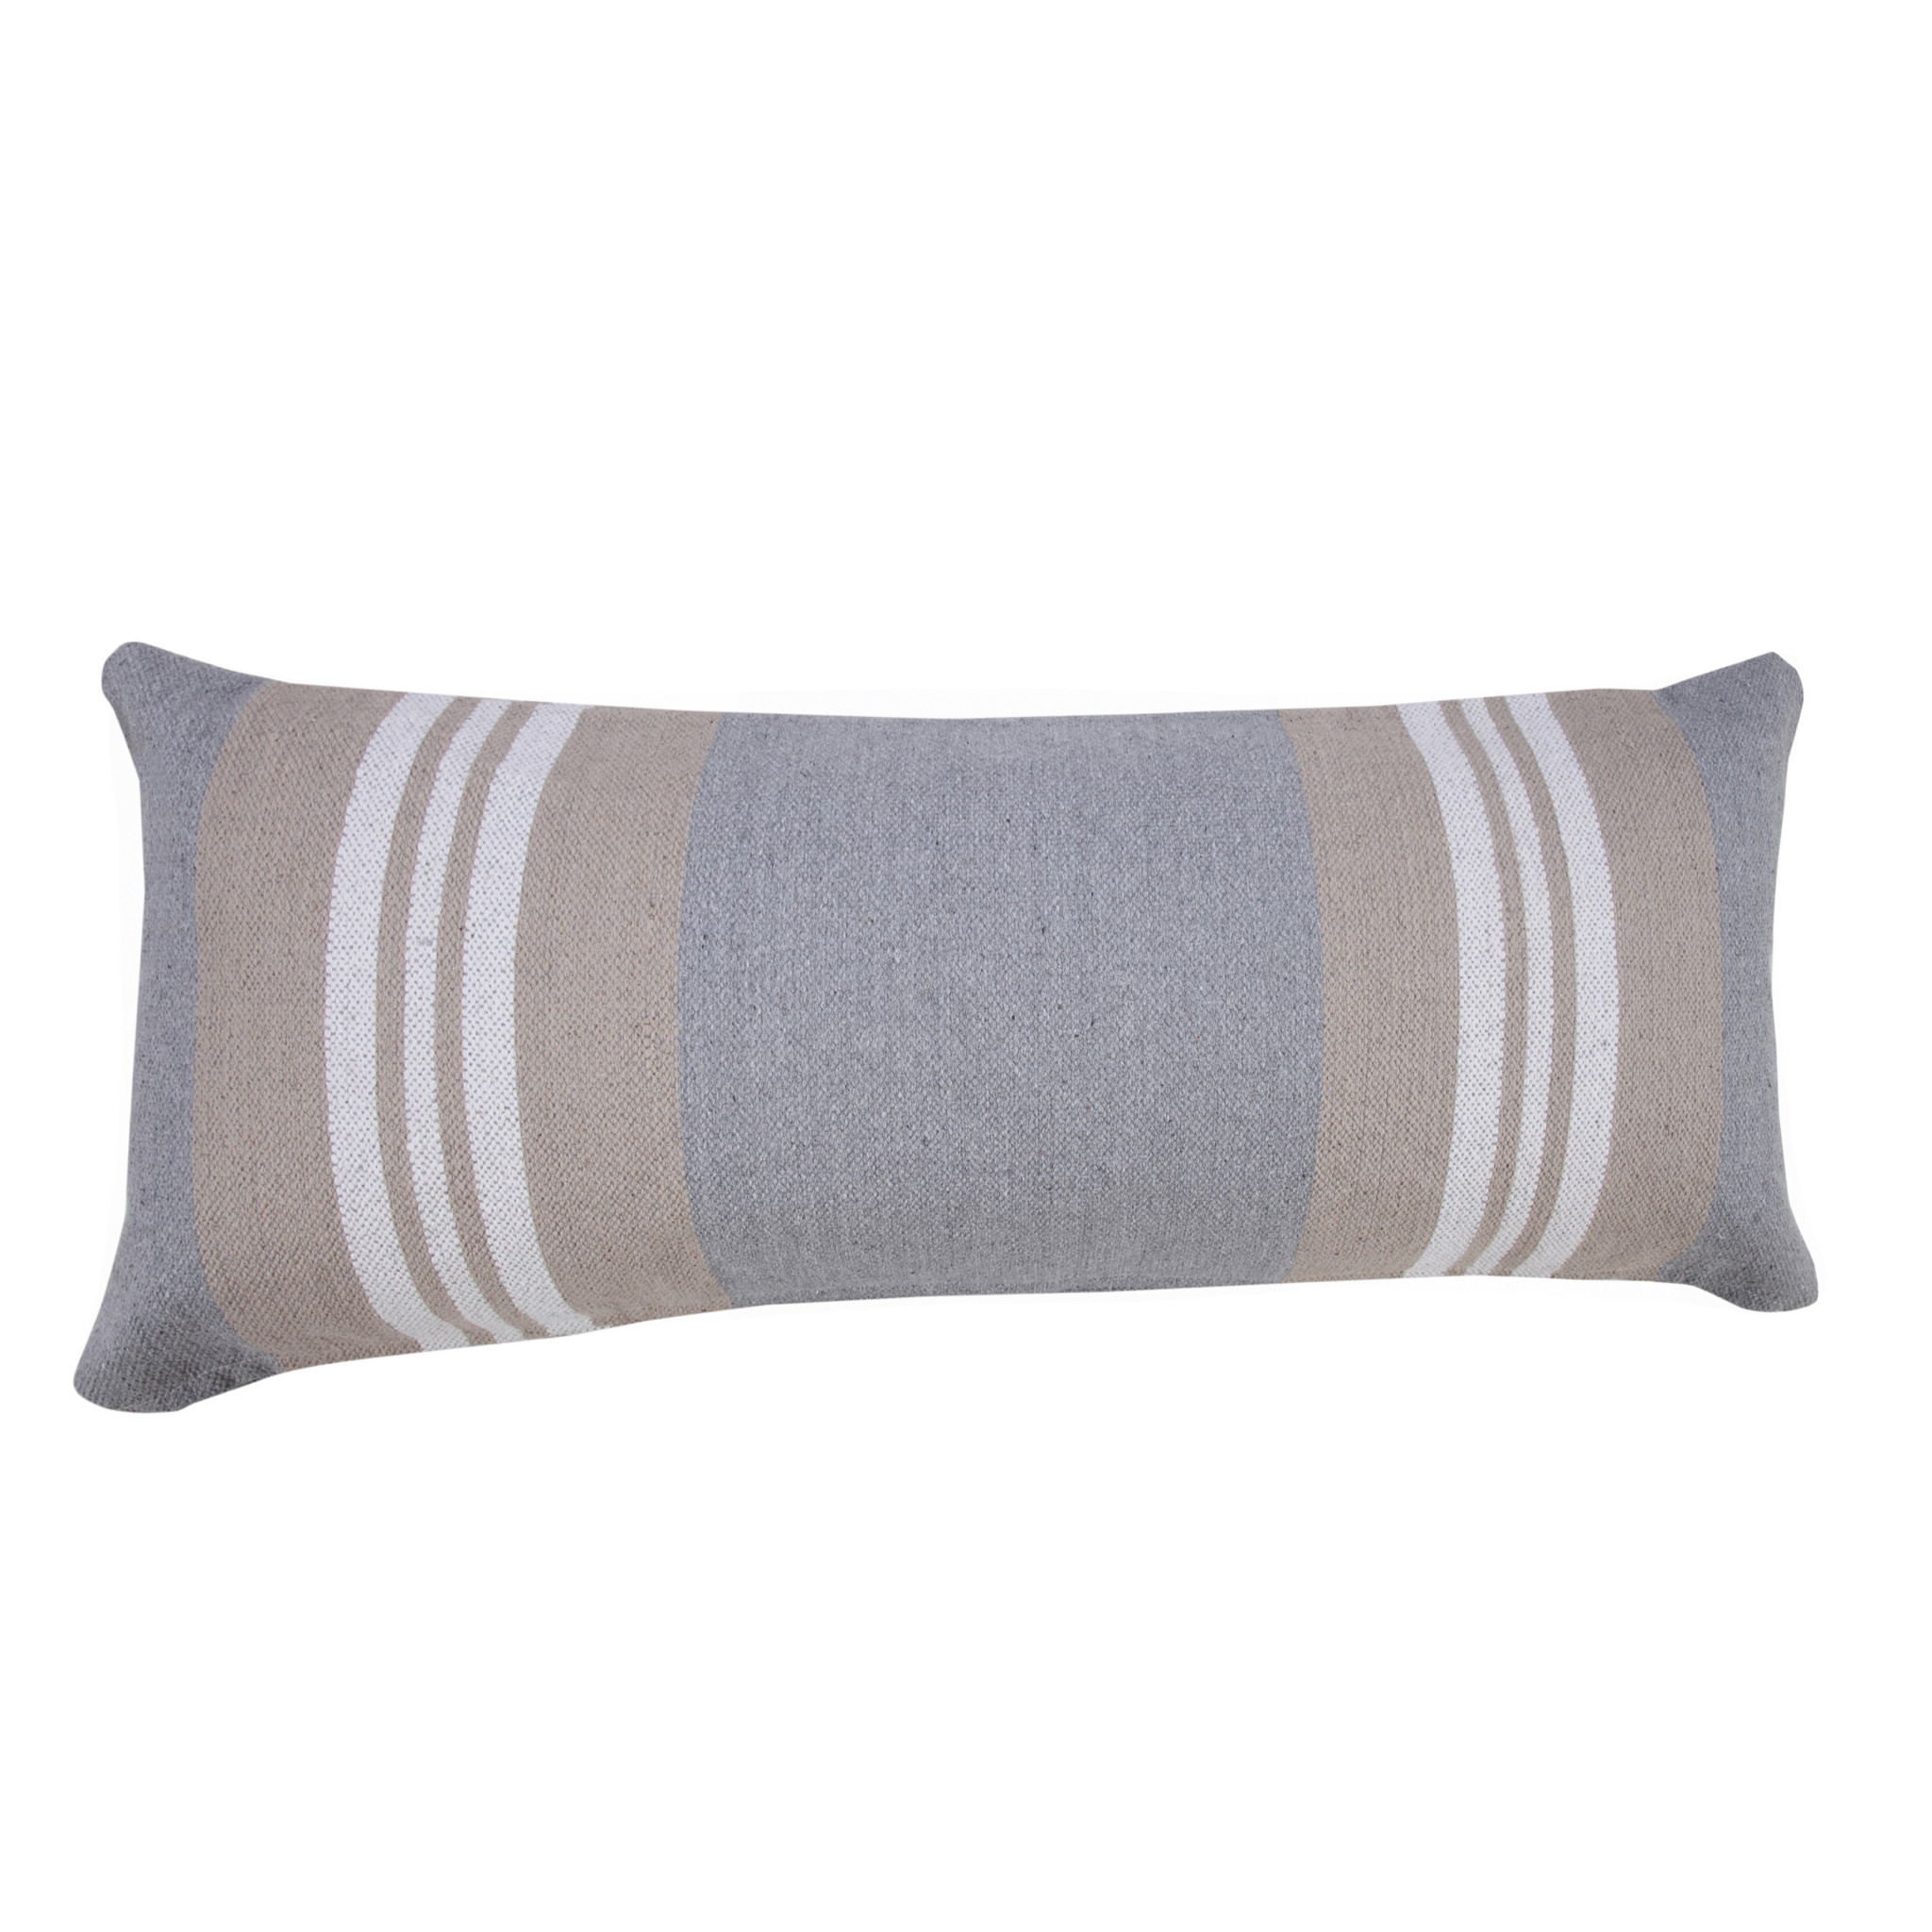 14" X 36" Beige and Gray Striped Cotton Zippered Pillow-517267-1